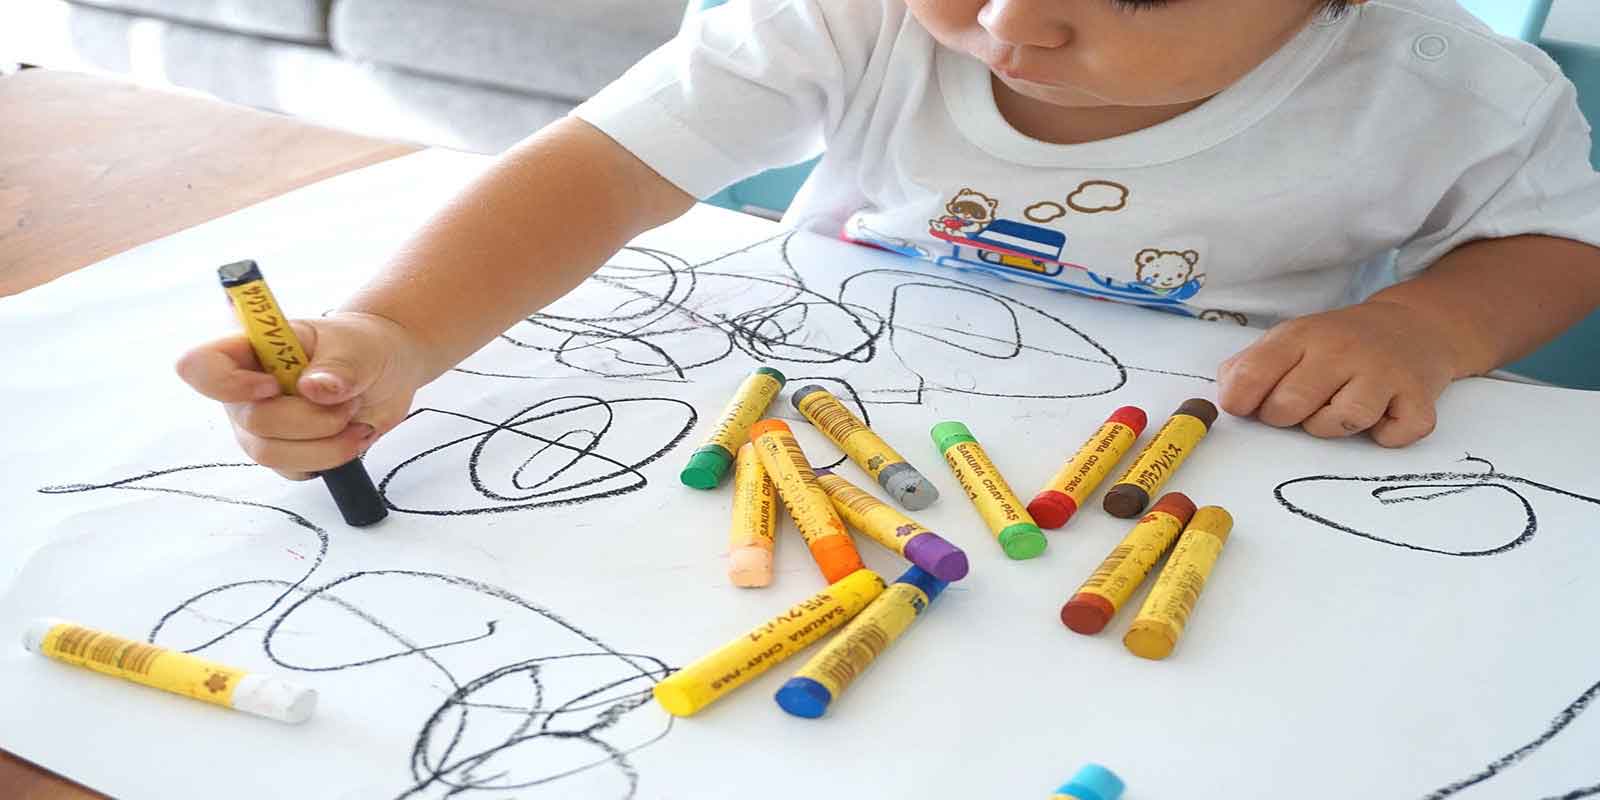 A young child is using crayons to improve fine motor skills